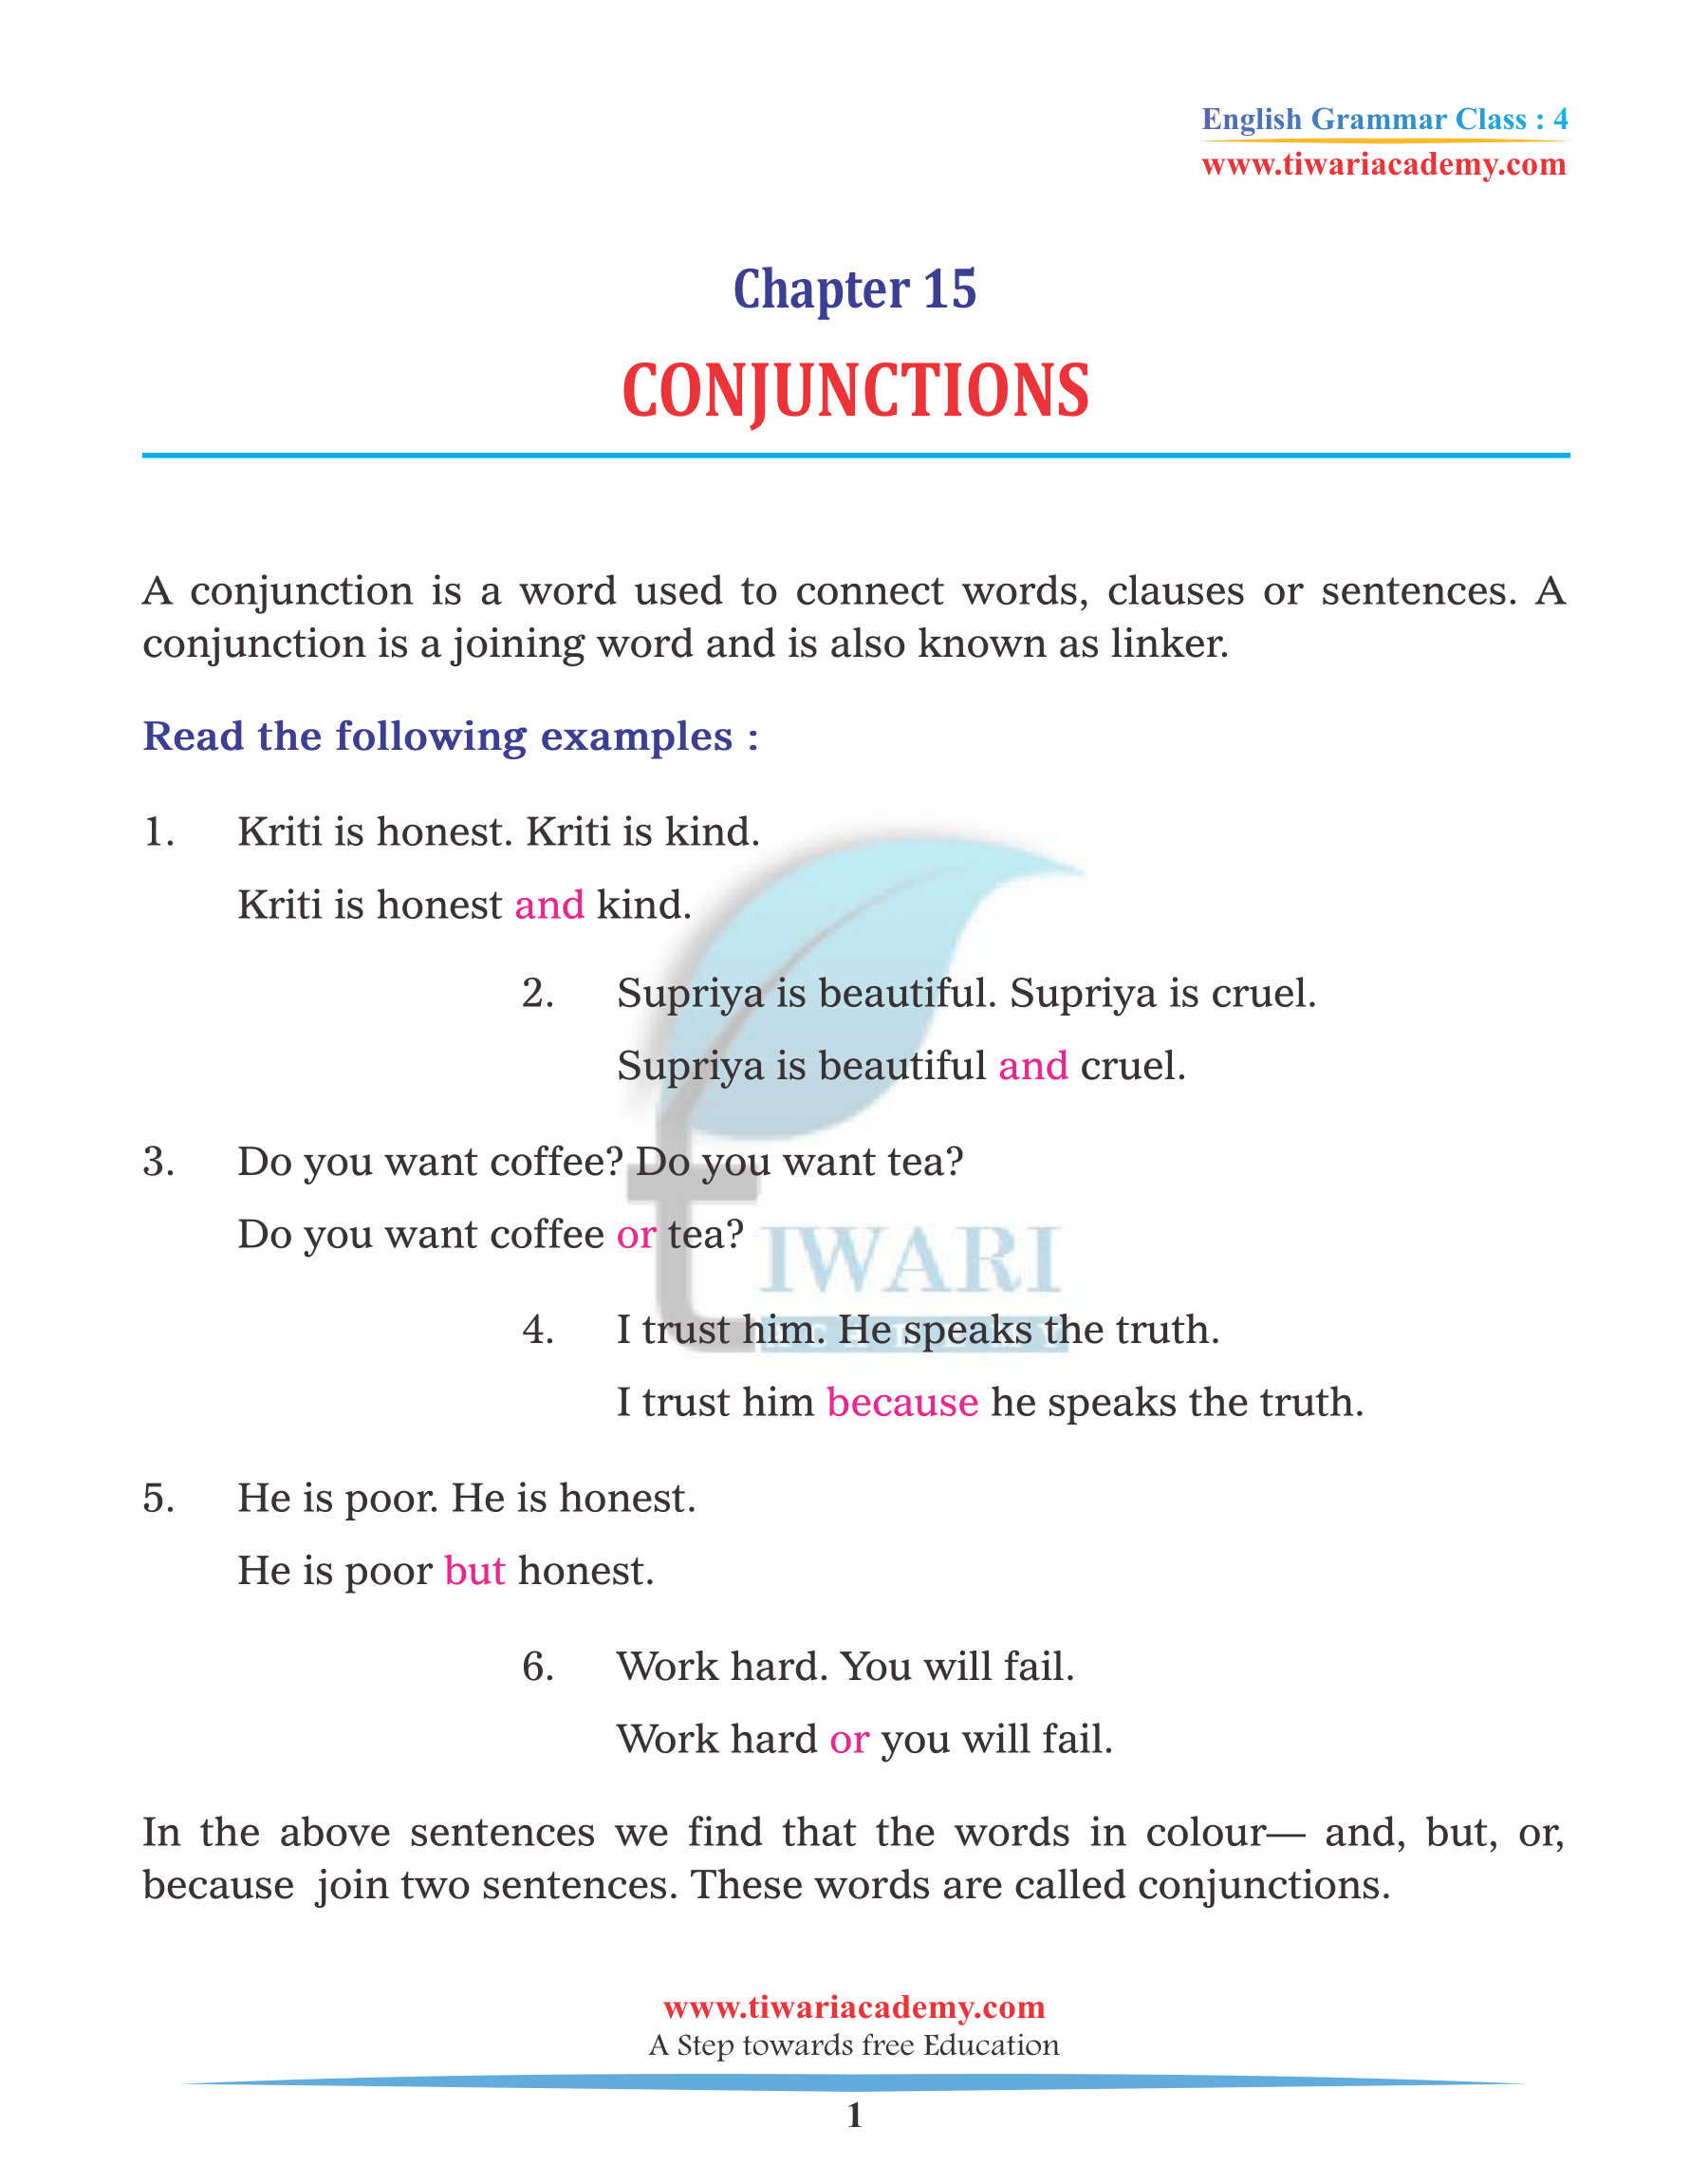 Class 4 English Grammar Chapter 15 Conjunctions